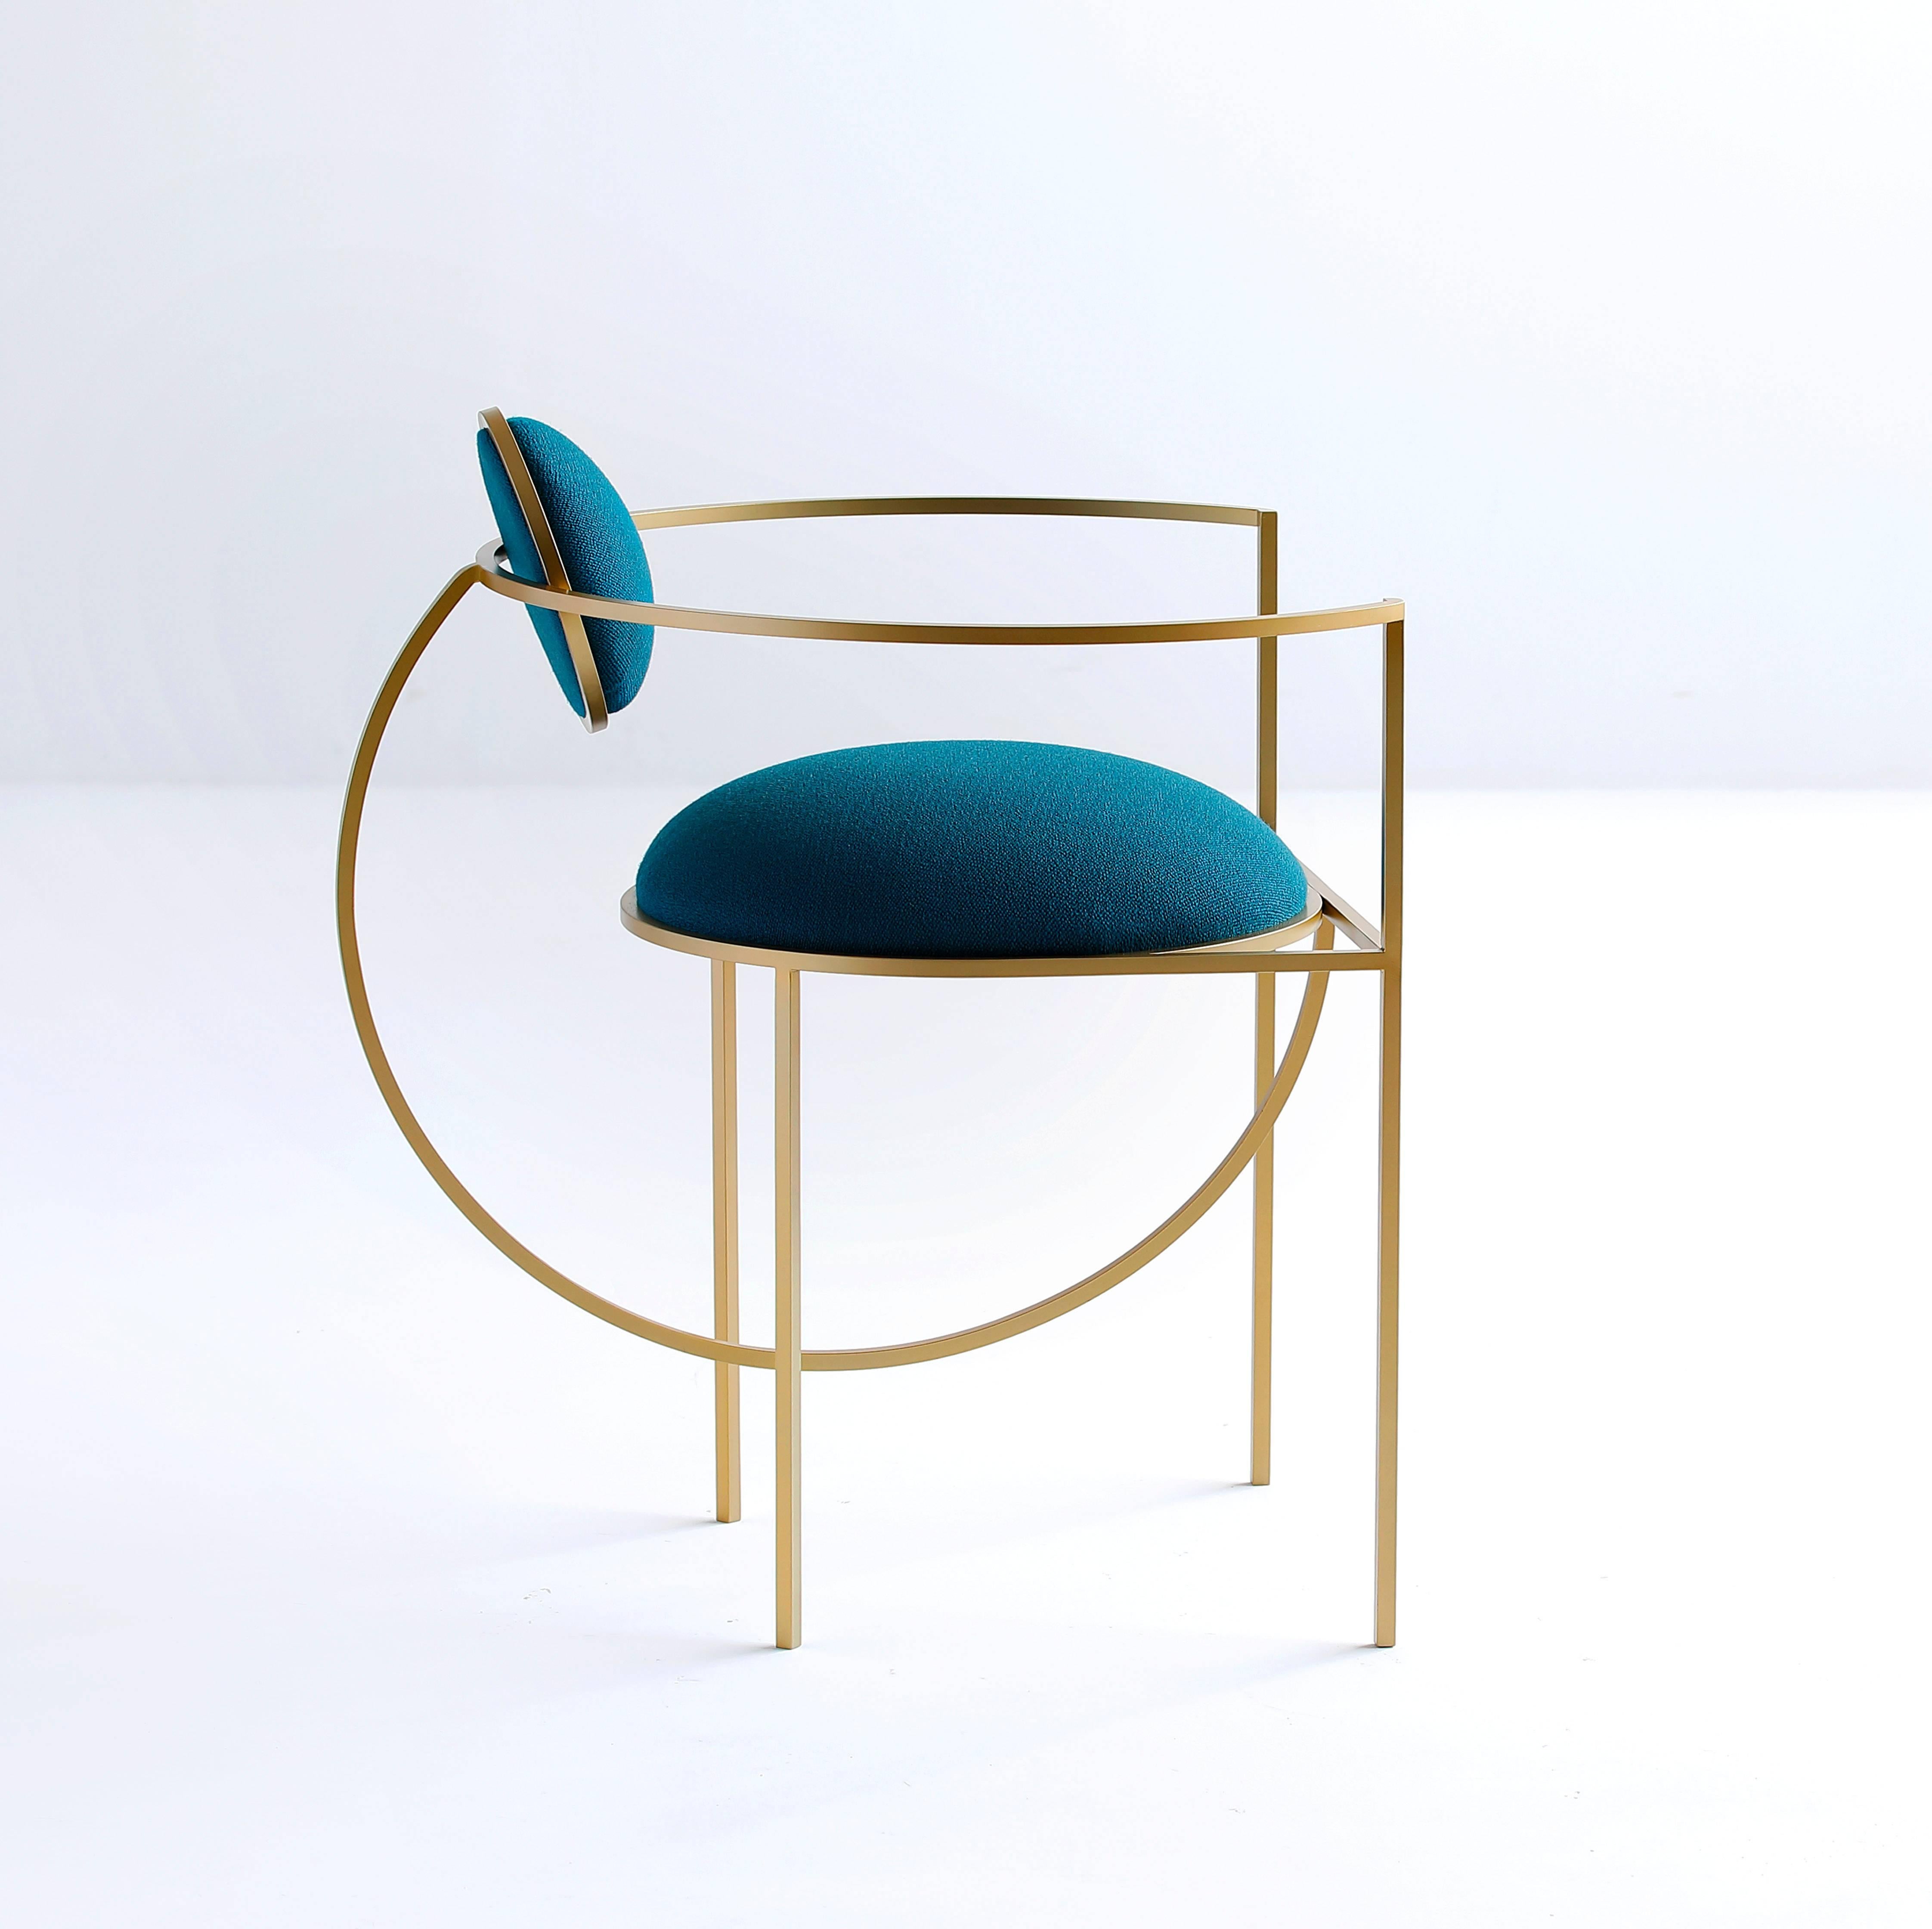 The Lunar chair is distinguished by two enveloping crescents for armrests, and a smaller backrest which, like a moon, circles its planet on an orbit of its own. Lara Bohinc develops her stellar themes, finding inspiration in planetary and lunar